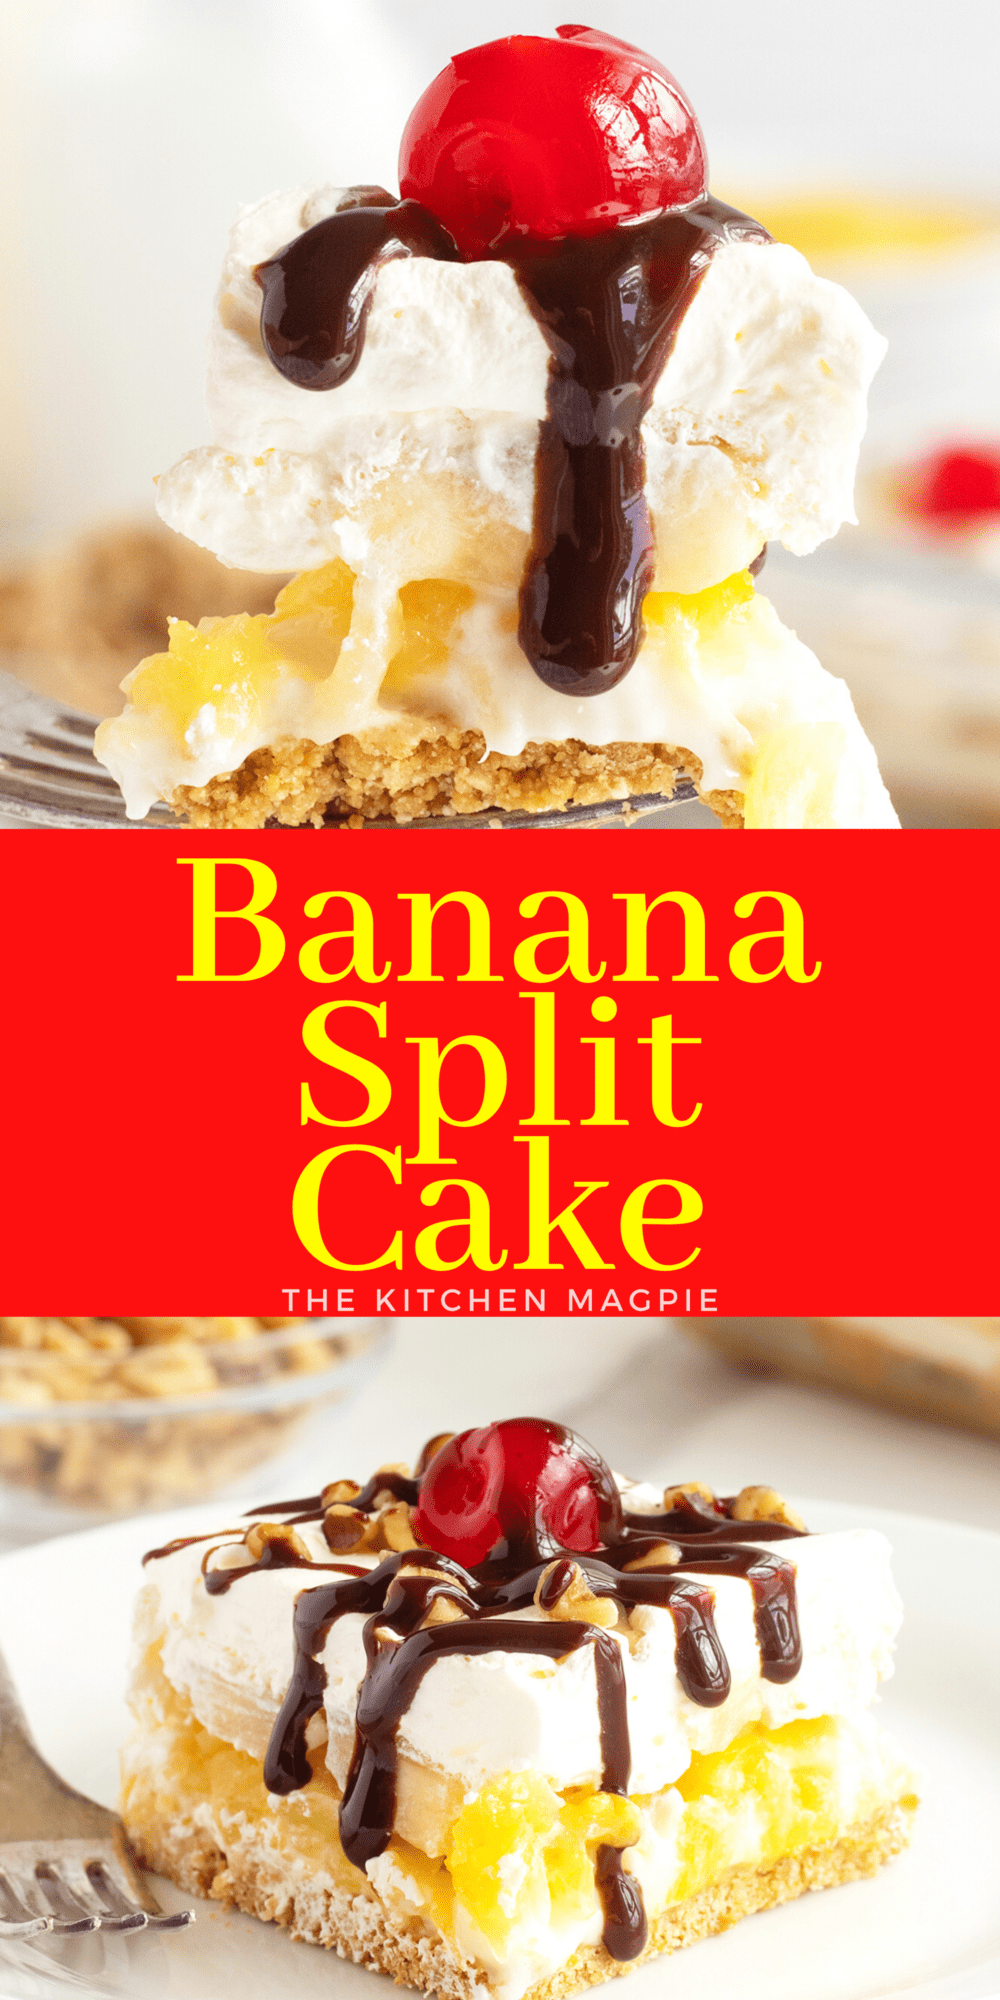 The famous banana split is one of the most well known desserts for a great reason. This perfect dessert combination is perhaps even better when made as a cake as well!